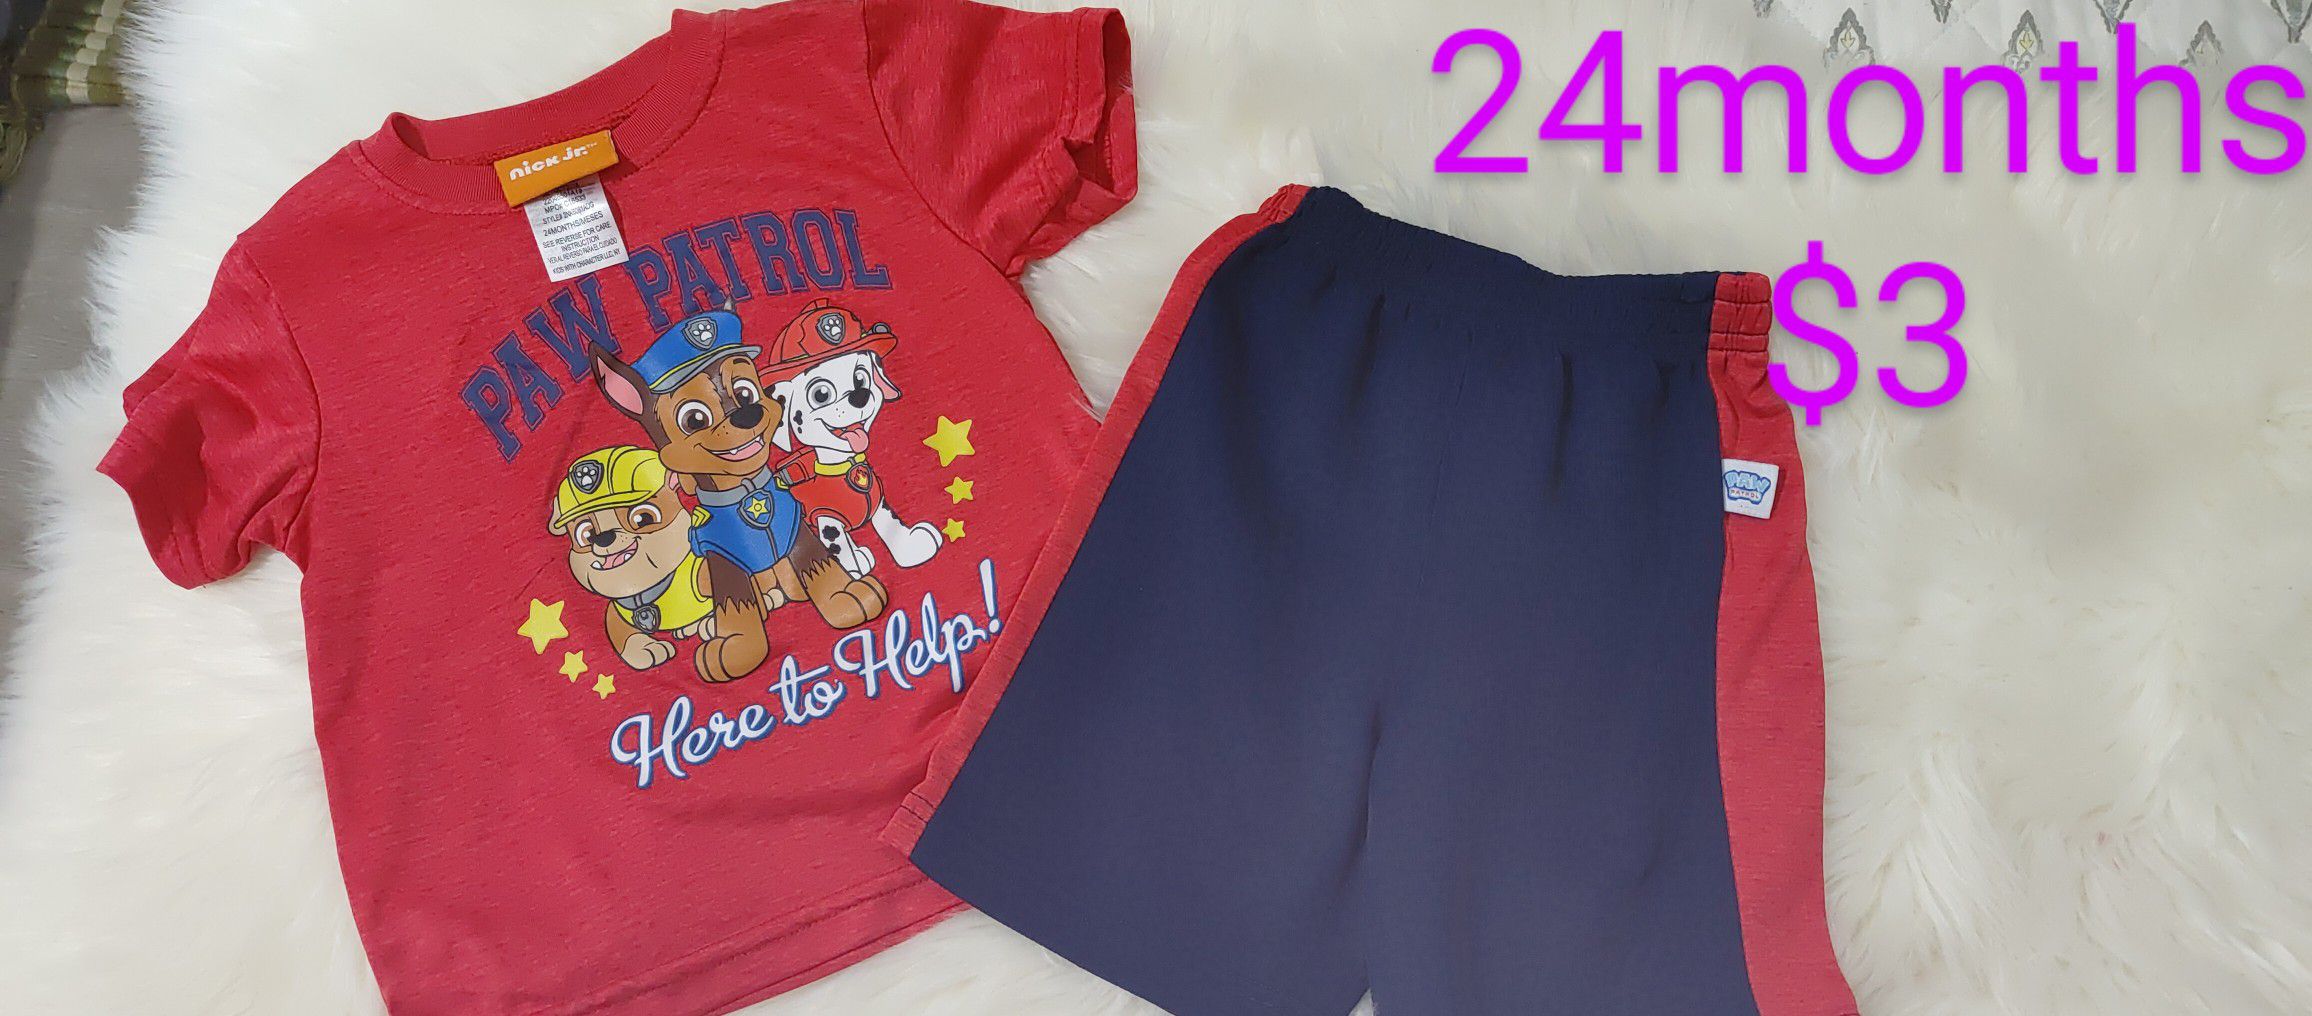 Paw 🐾 patrol outfit 24 months $3